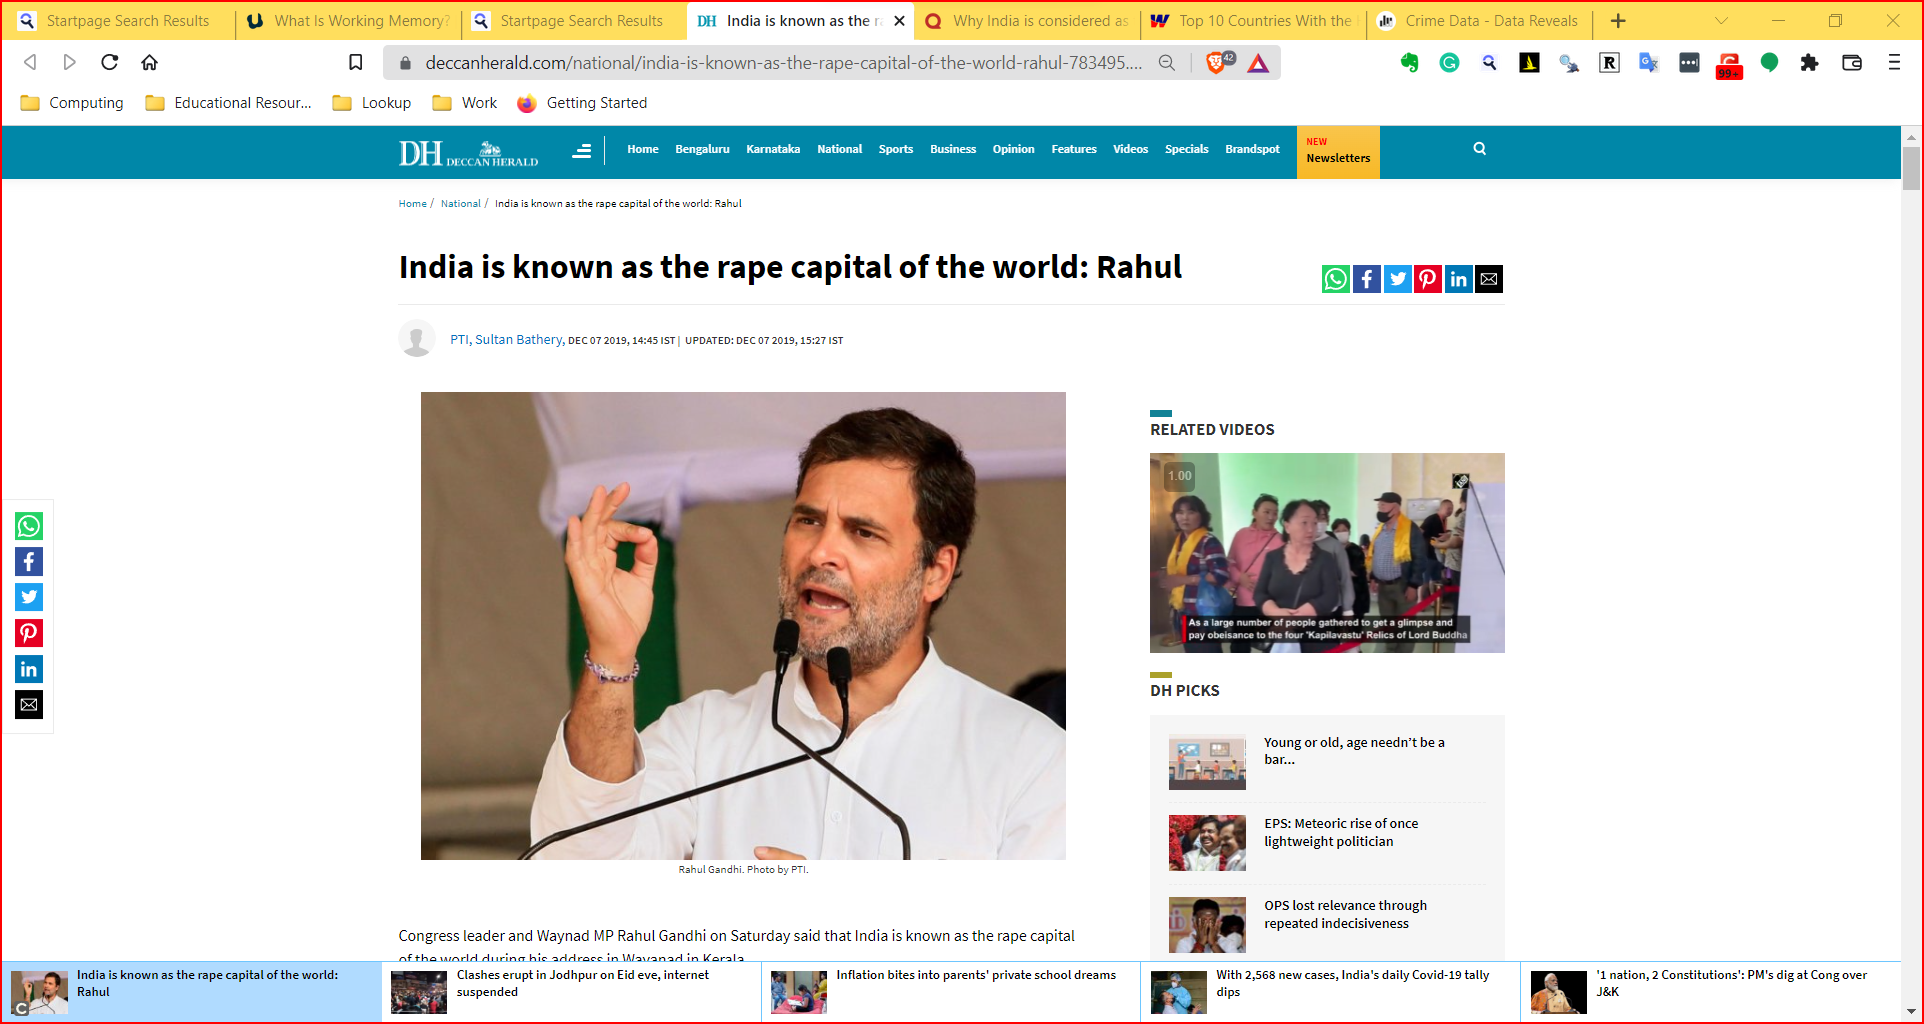 Source https://www.deccanherald.com/national/india-is-known-as-the-rape-capital-of-the-world-rahul-783495.html